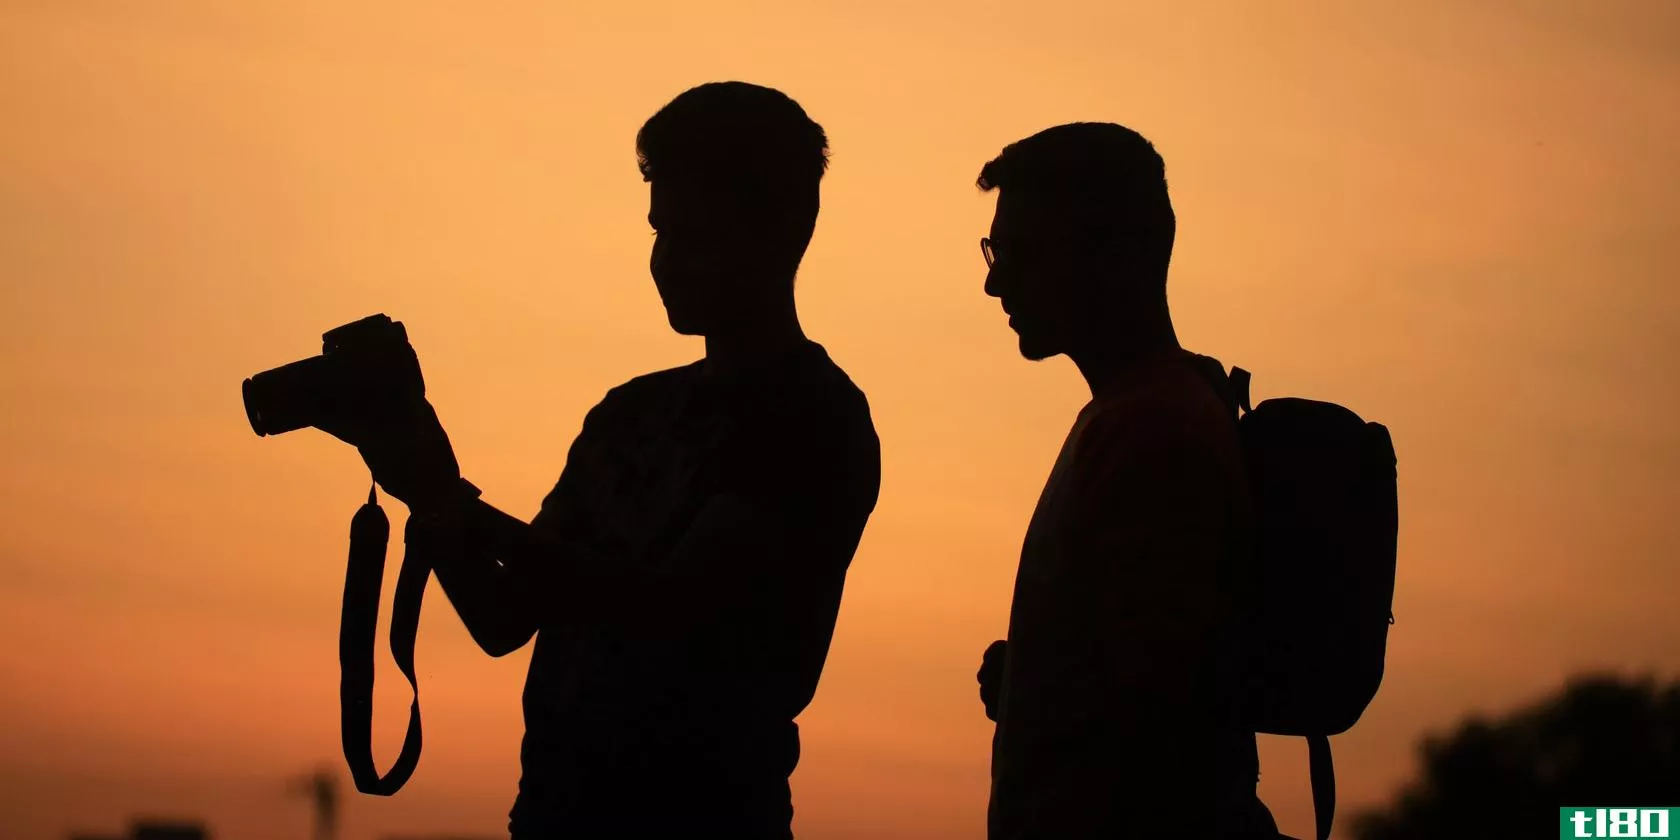 The silhouettes of two guys, one holding a camera